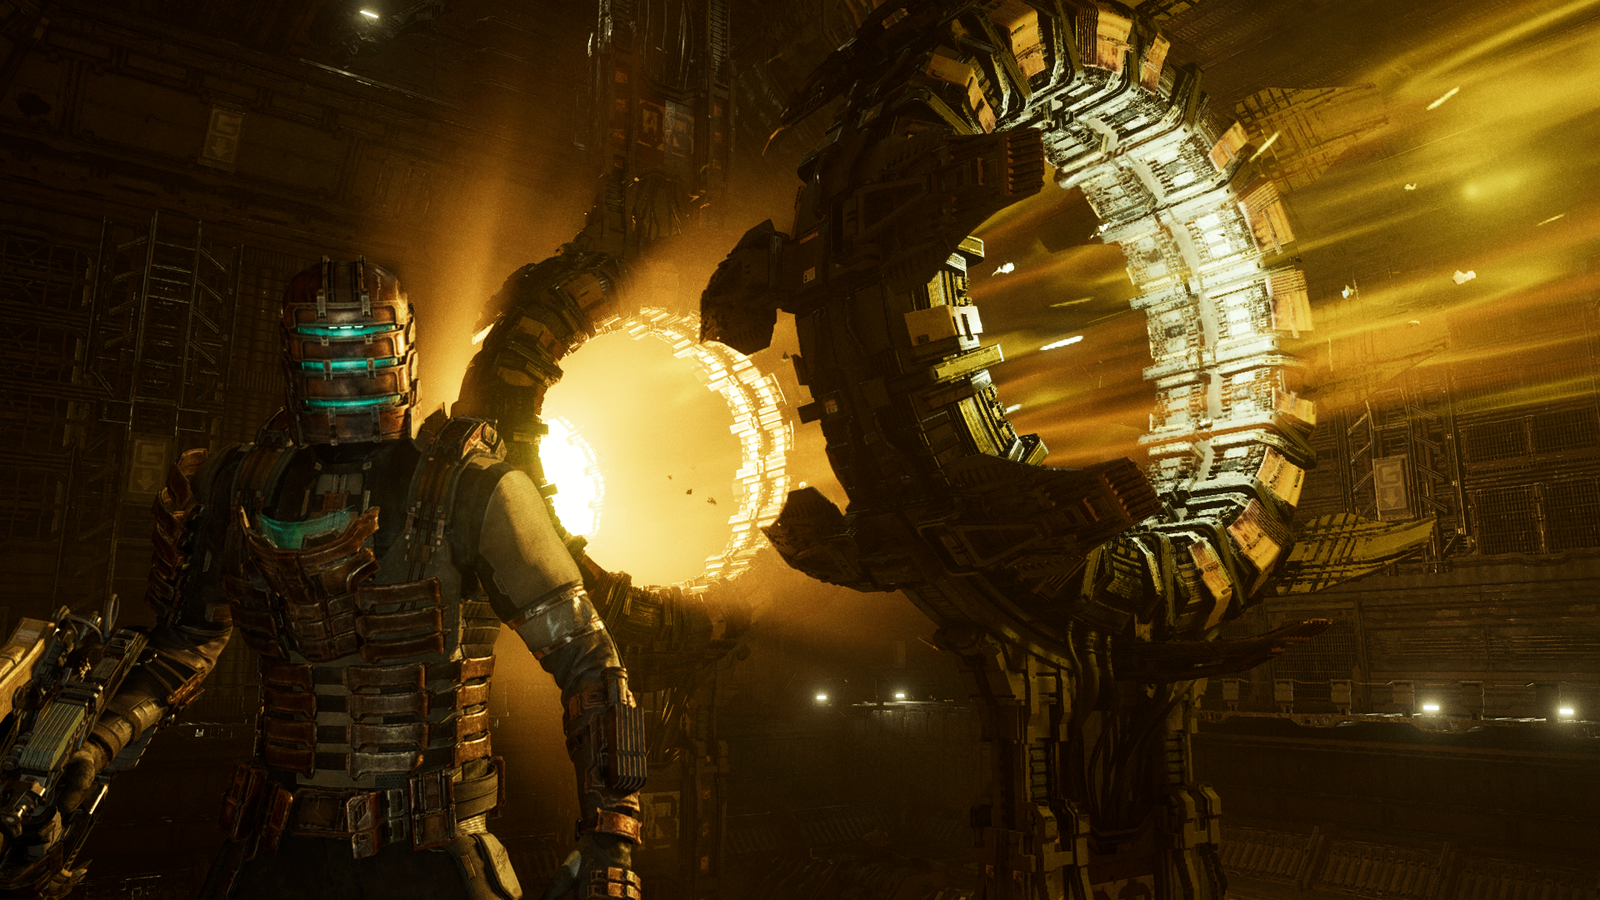 Game review: Isaac Clarke is back battling Necromorphs in 'Dead Space 3